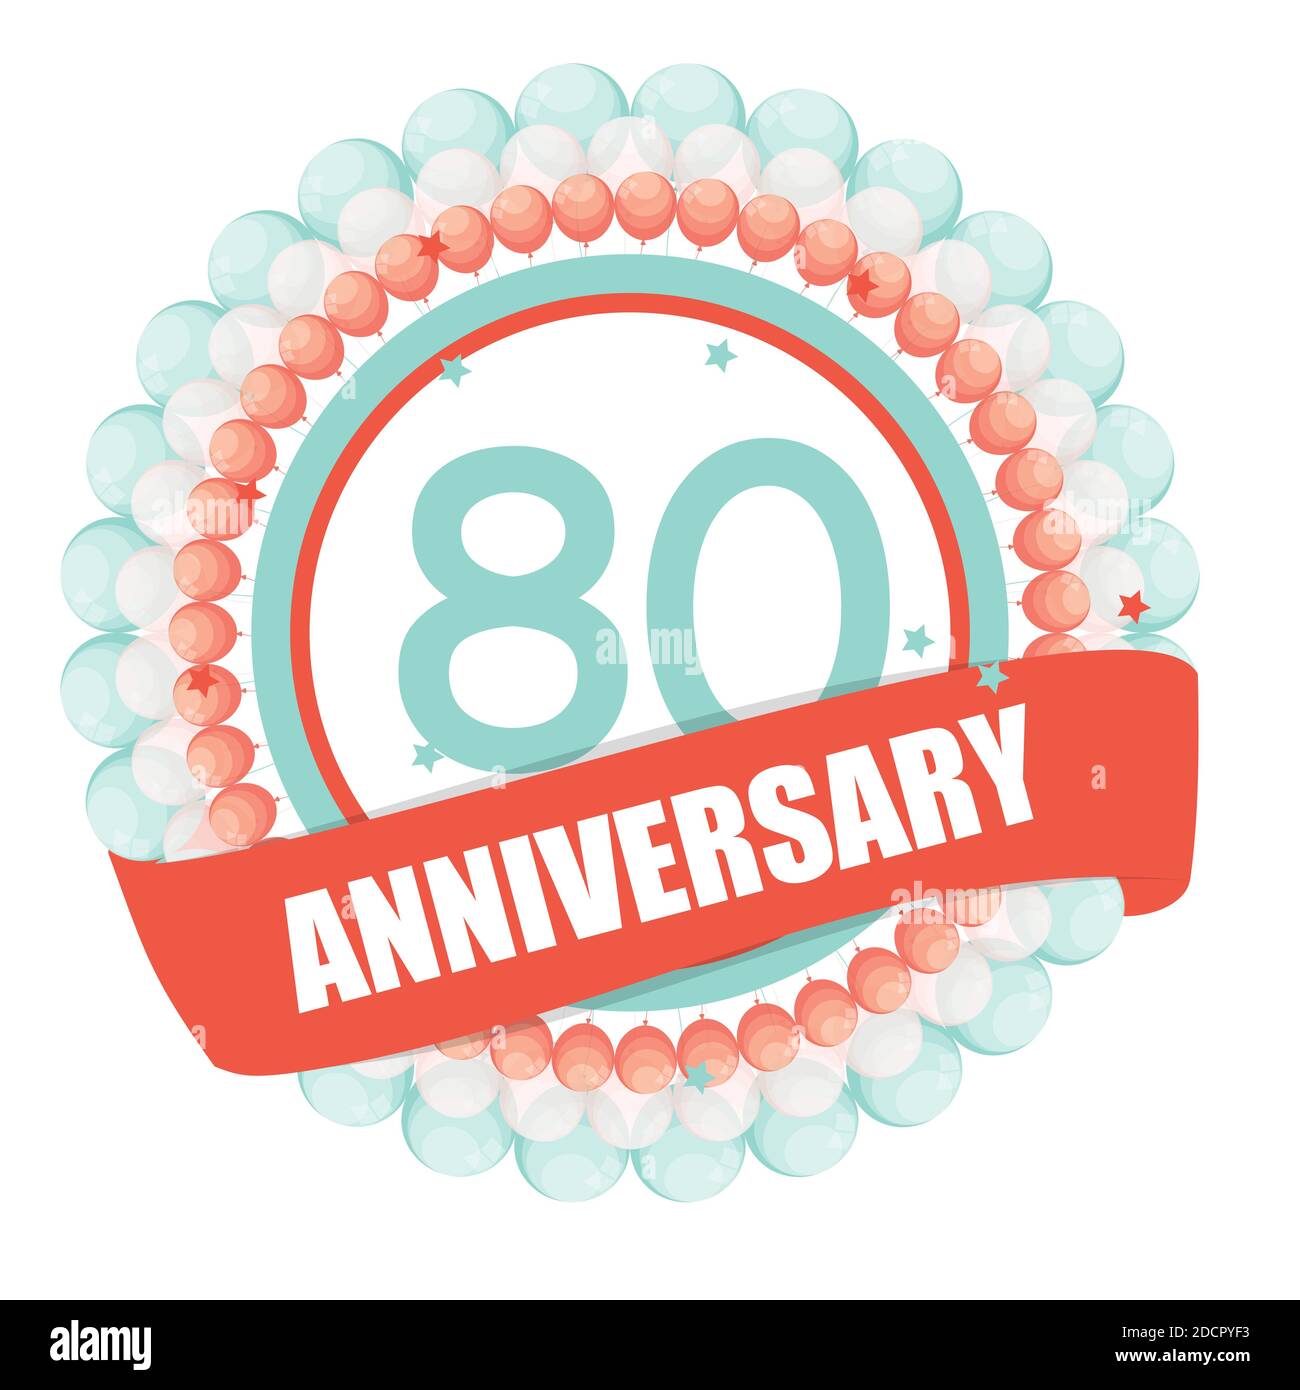 Cute Template 80 Years Anniversary with Balloons and Ribbon Illustration Stock Photo